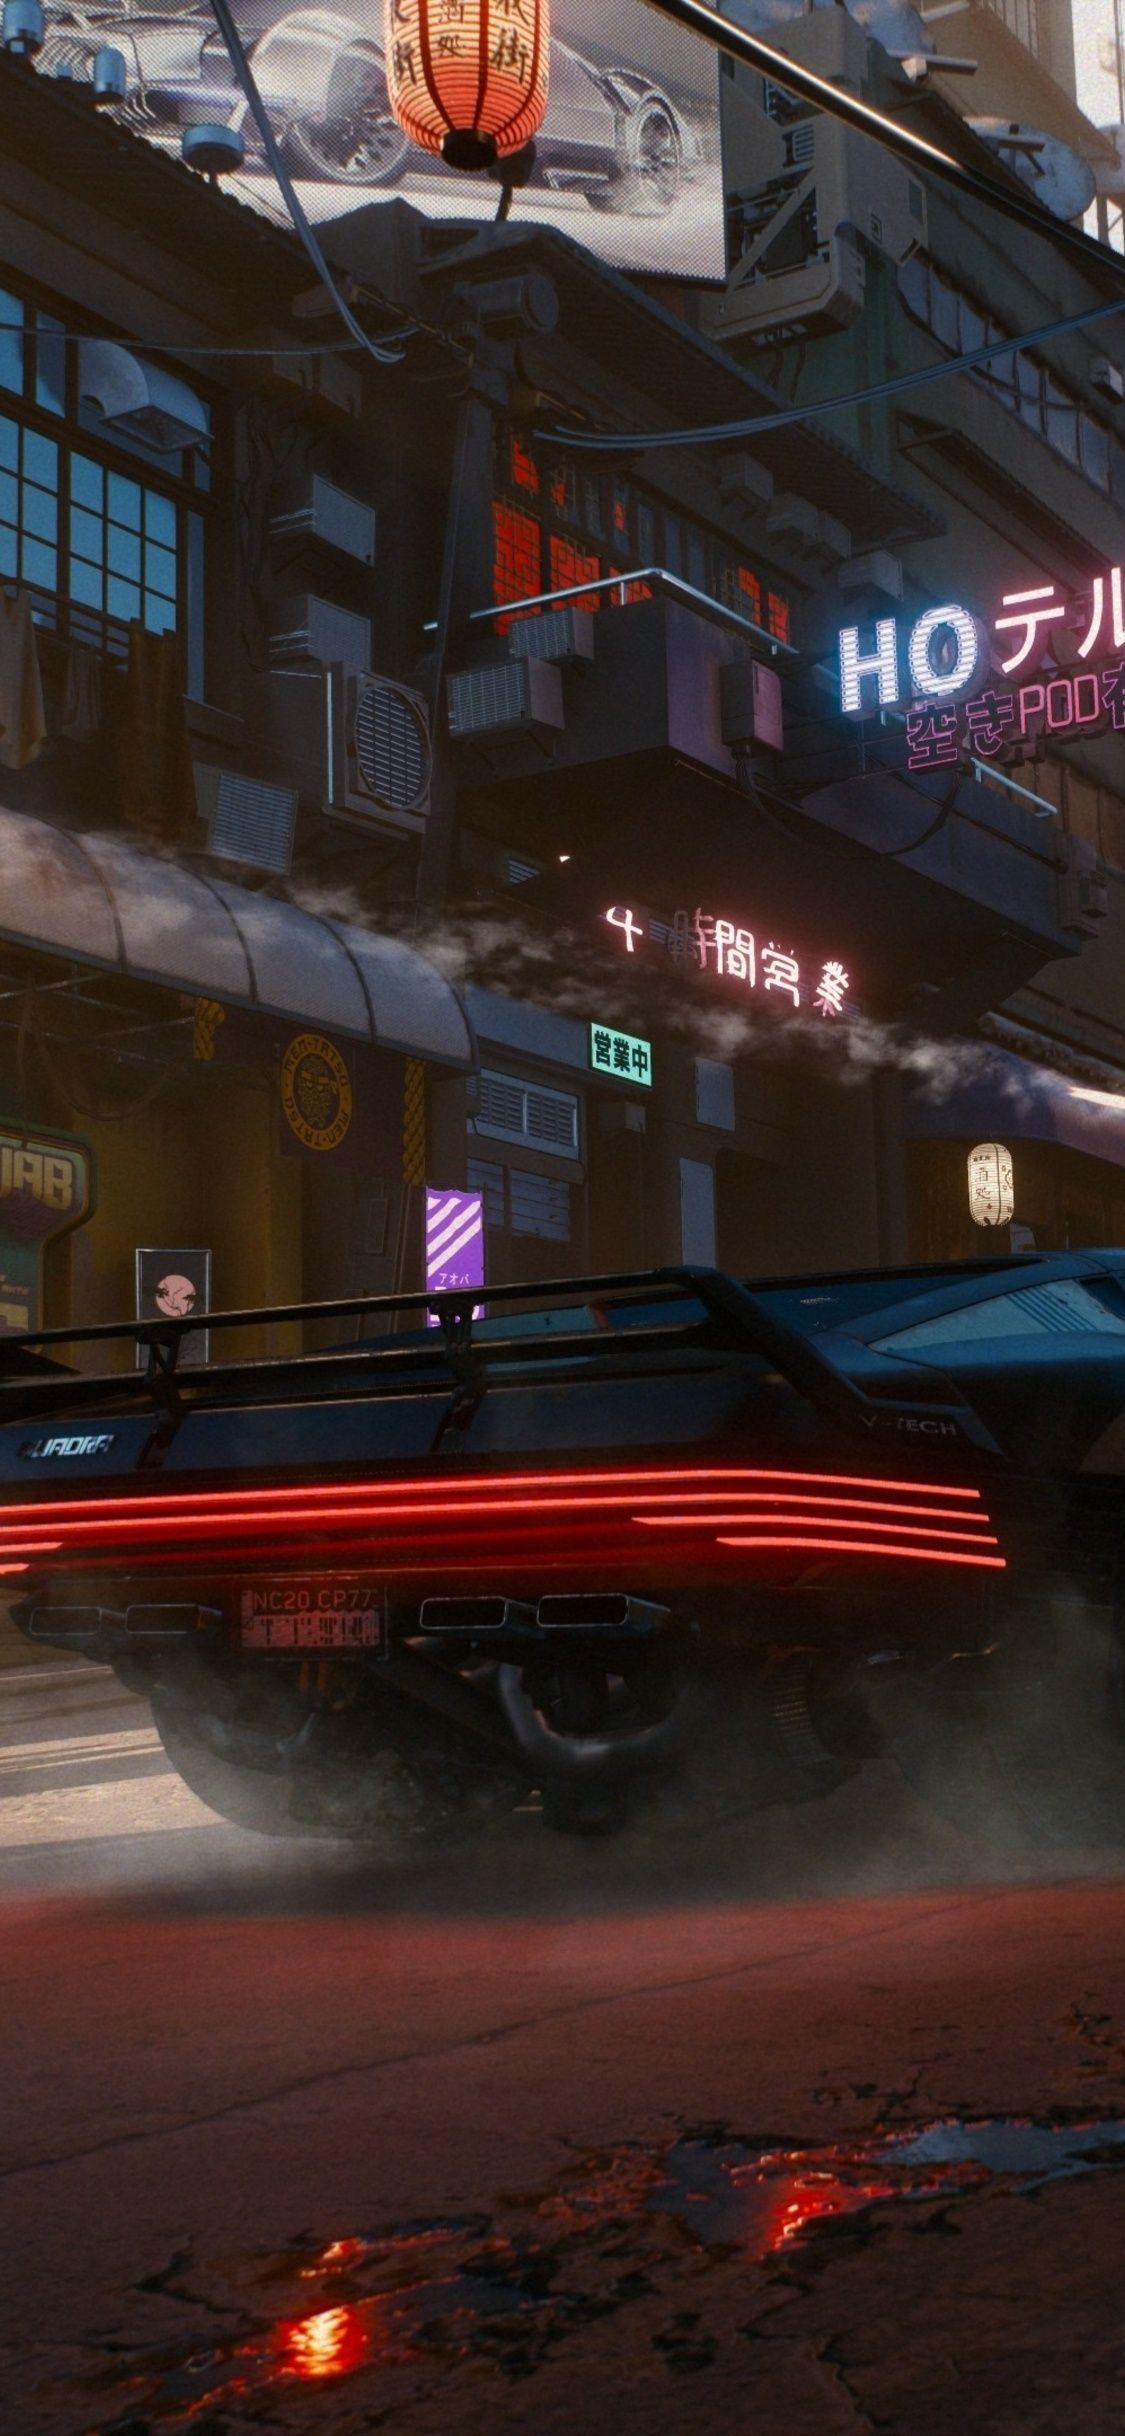 Cyberpunk 2077 Scifi Vehicles 4k iPhone XS, iPhone iPhone X HD 4k Wallpaper, Image, Background, Photo and Picture